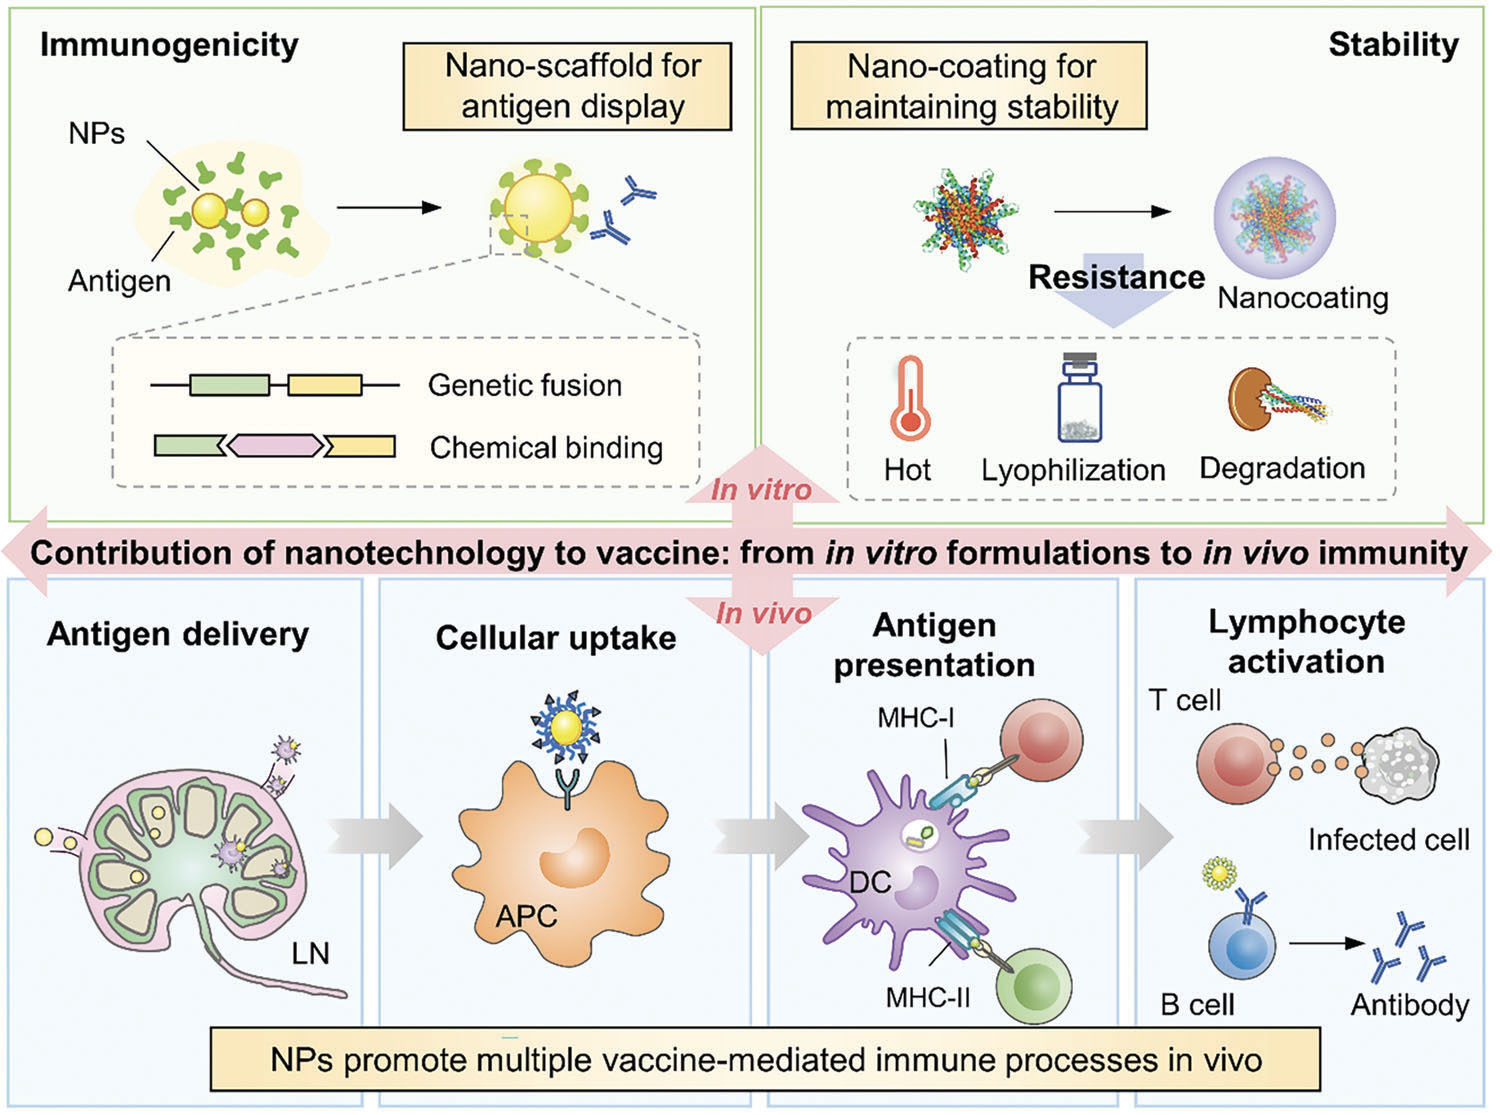 Contribution of nanotechnology to vaccine from in vitro formulations to in vivo immunity